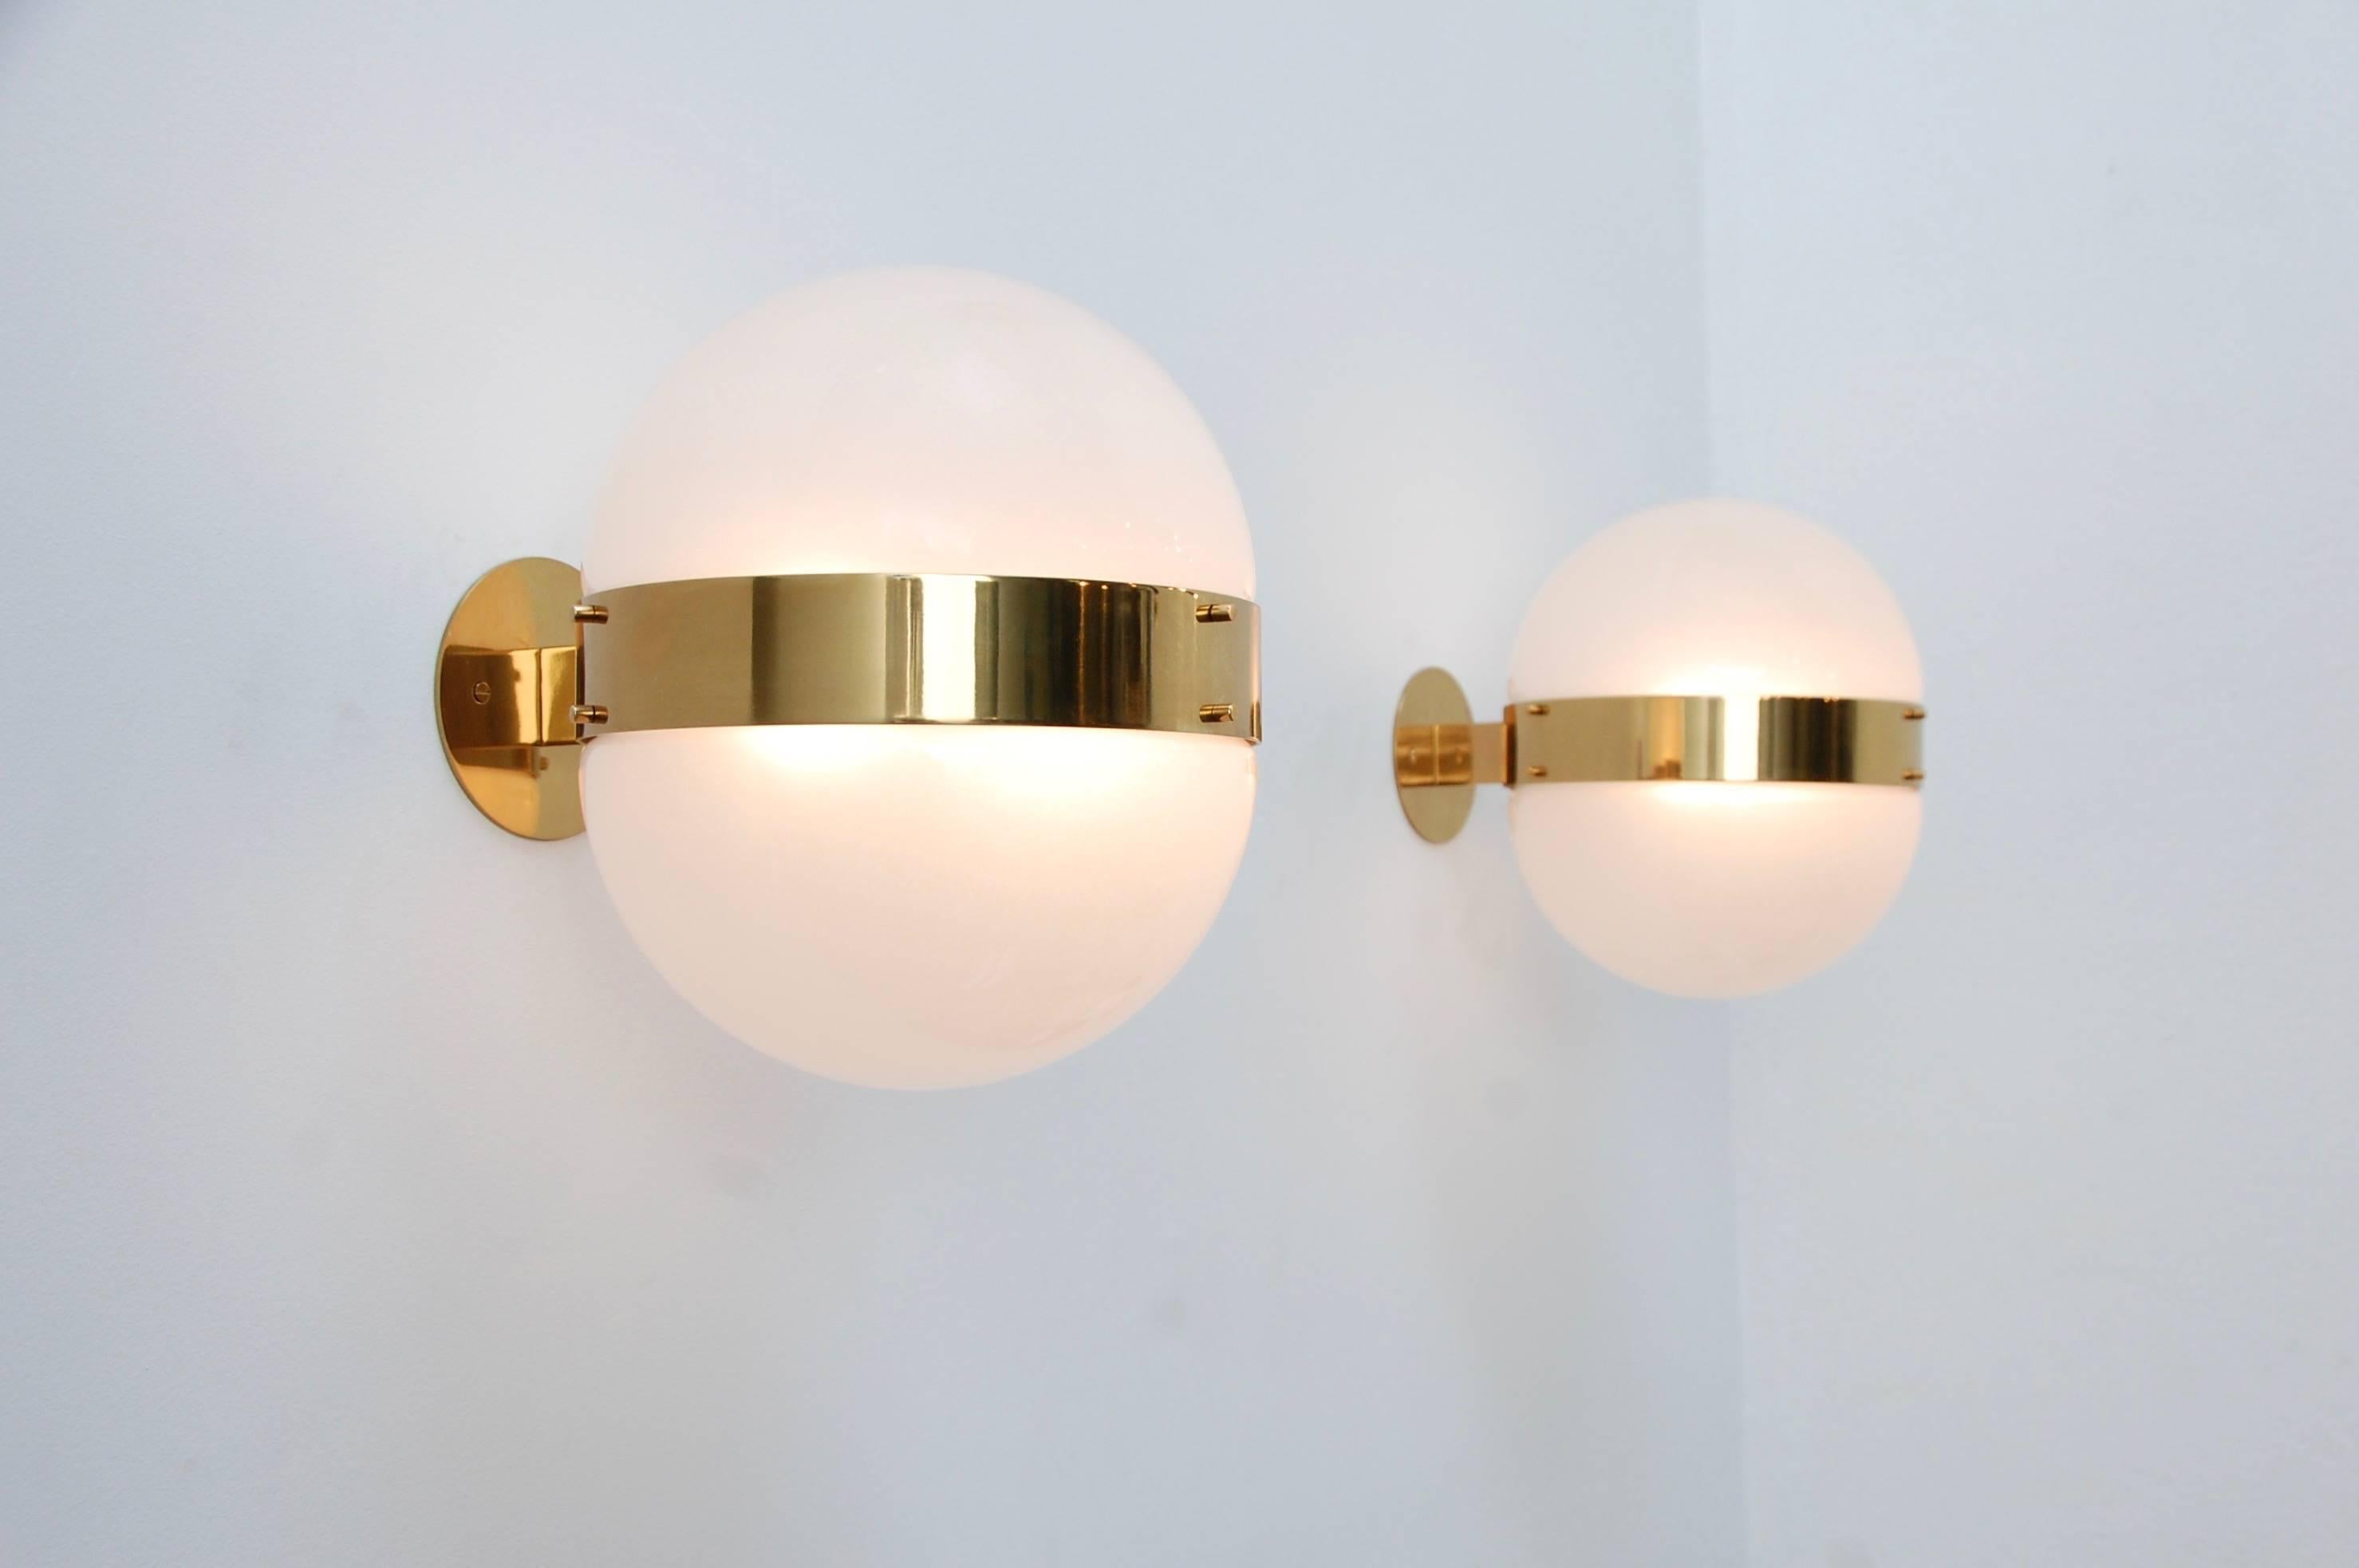 (3) beautiful glass and brass Sergio Mazza sconces by Artemide from Italy. These sconces are fully restored and wired with 2 E26 medium based sockets. Lightbulbs included with order. 

Measurements: 
height 12”,
depth 12.75”, 
width 10”
backplate